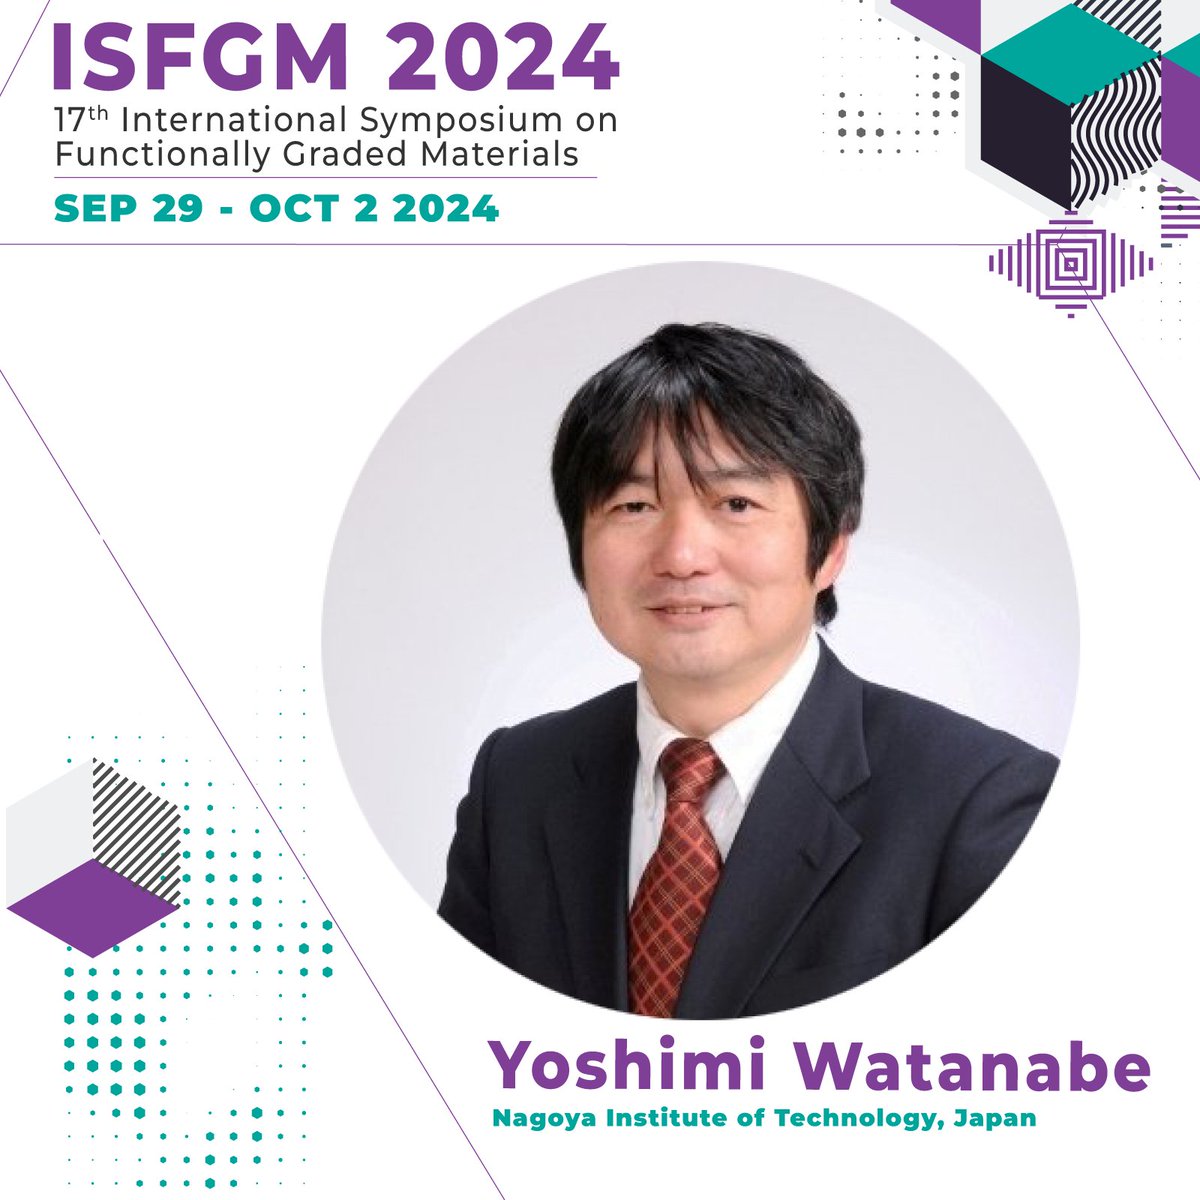 📢Meet our stellar lineup of plenary speakers for the upcoming 2024 Functionally #GradedMaterials (#FGMs) #Conference!      

+ Professor Yoshimi Watanabe, Nagoya Institute of Technology, Japan

+ Submit your abstract today: events.inl.int/isfgm2024 

#inlnano #abstractsubmission